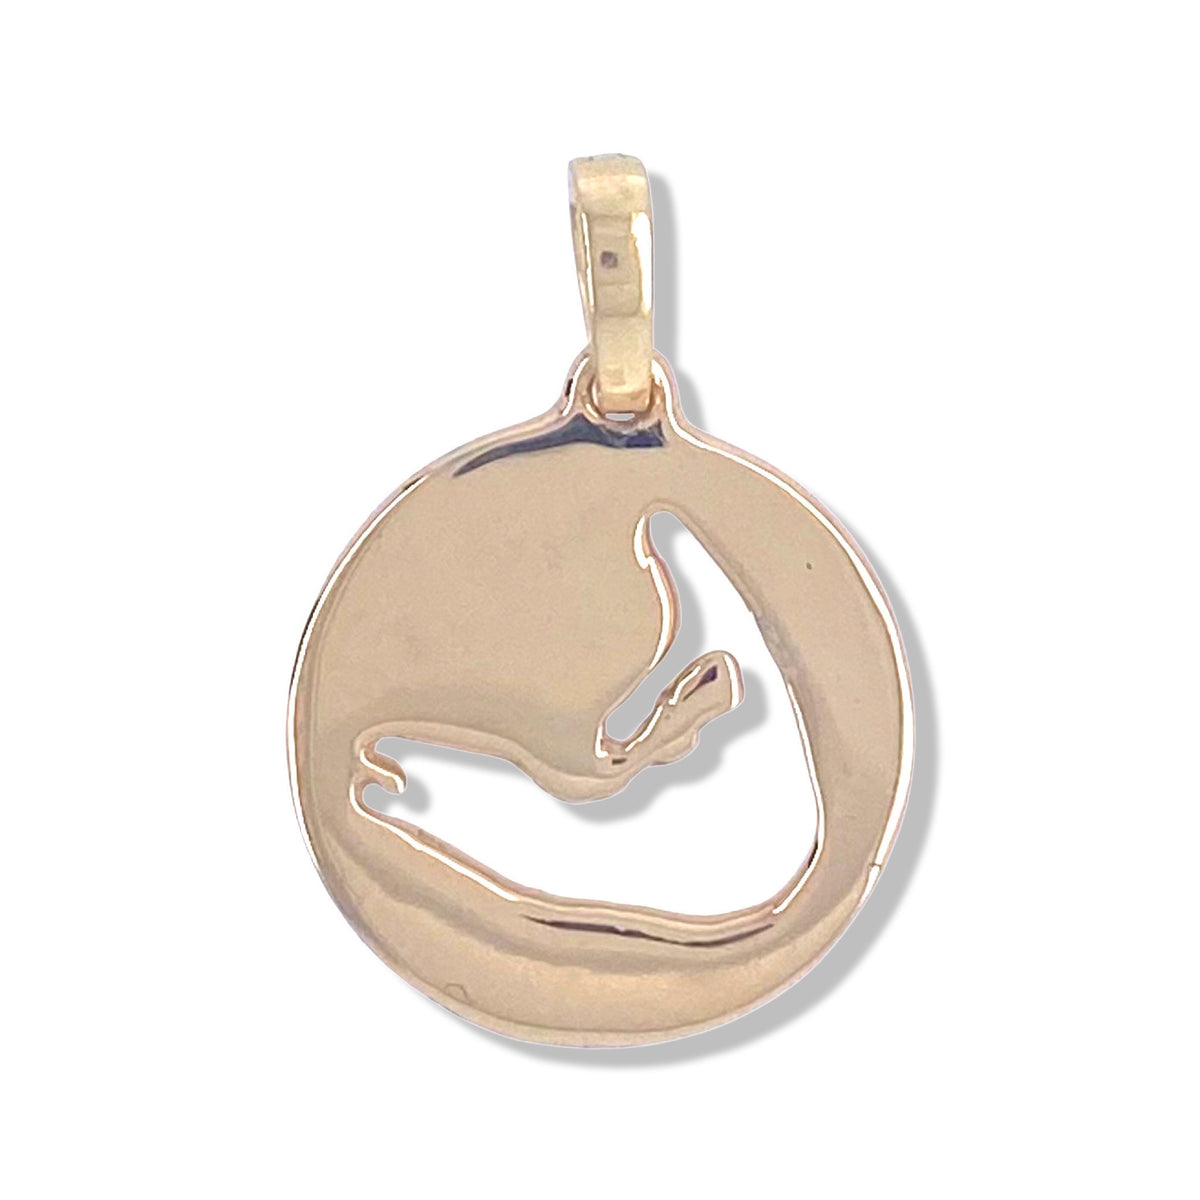 Nantucket Charm in 14k Gold By Keely Smith Jewelry Designs